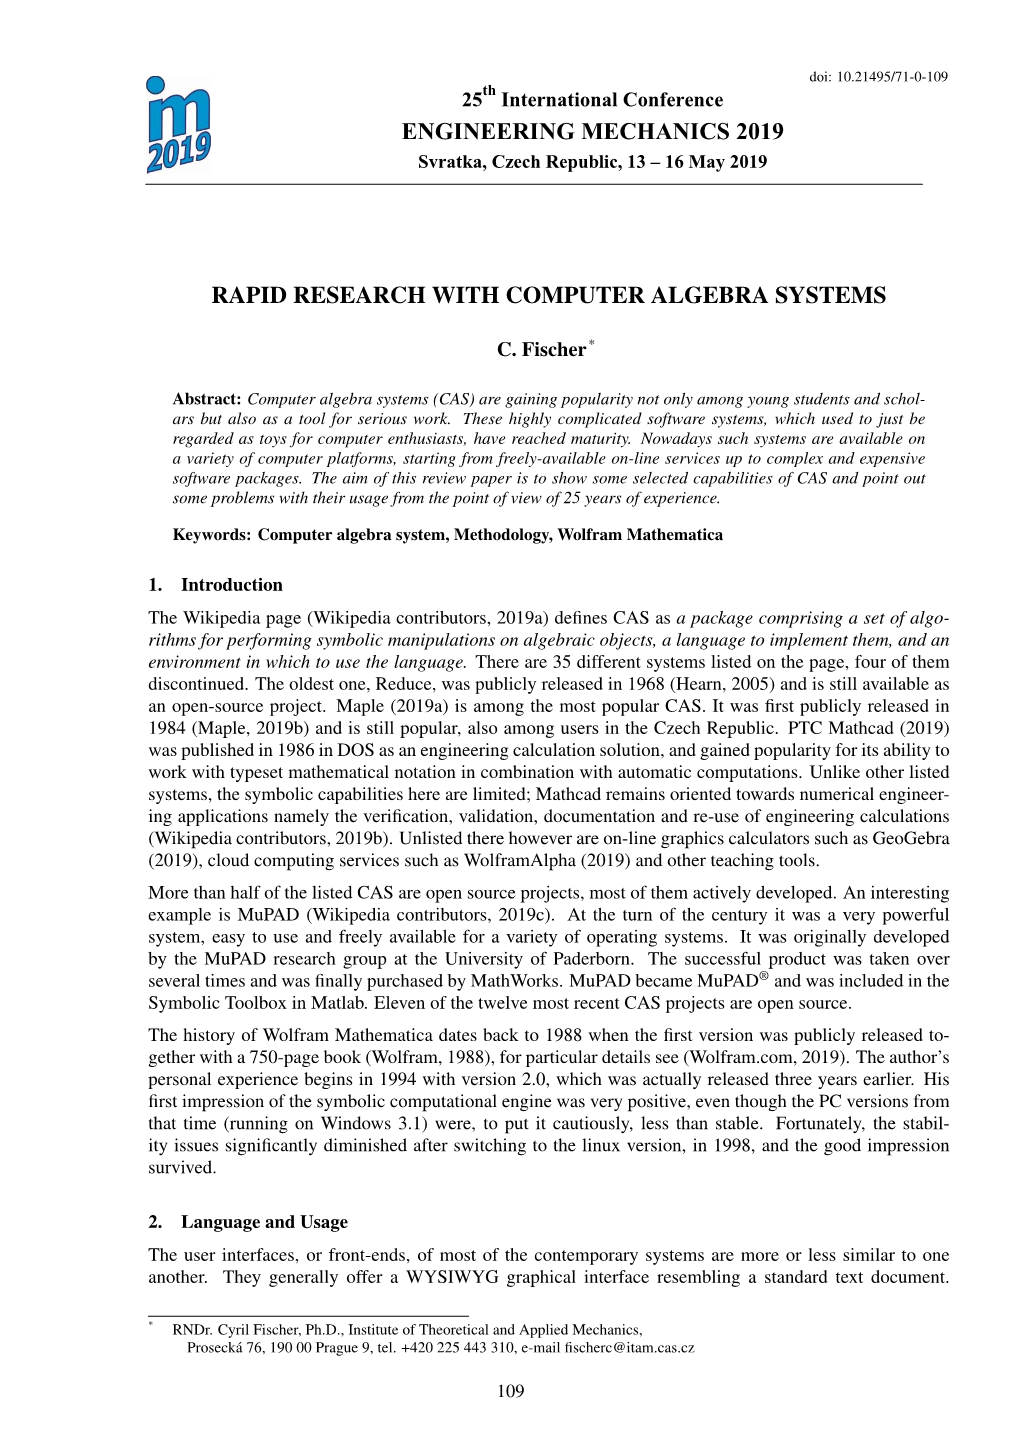 Rapid Research with Computer Algebra Systems